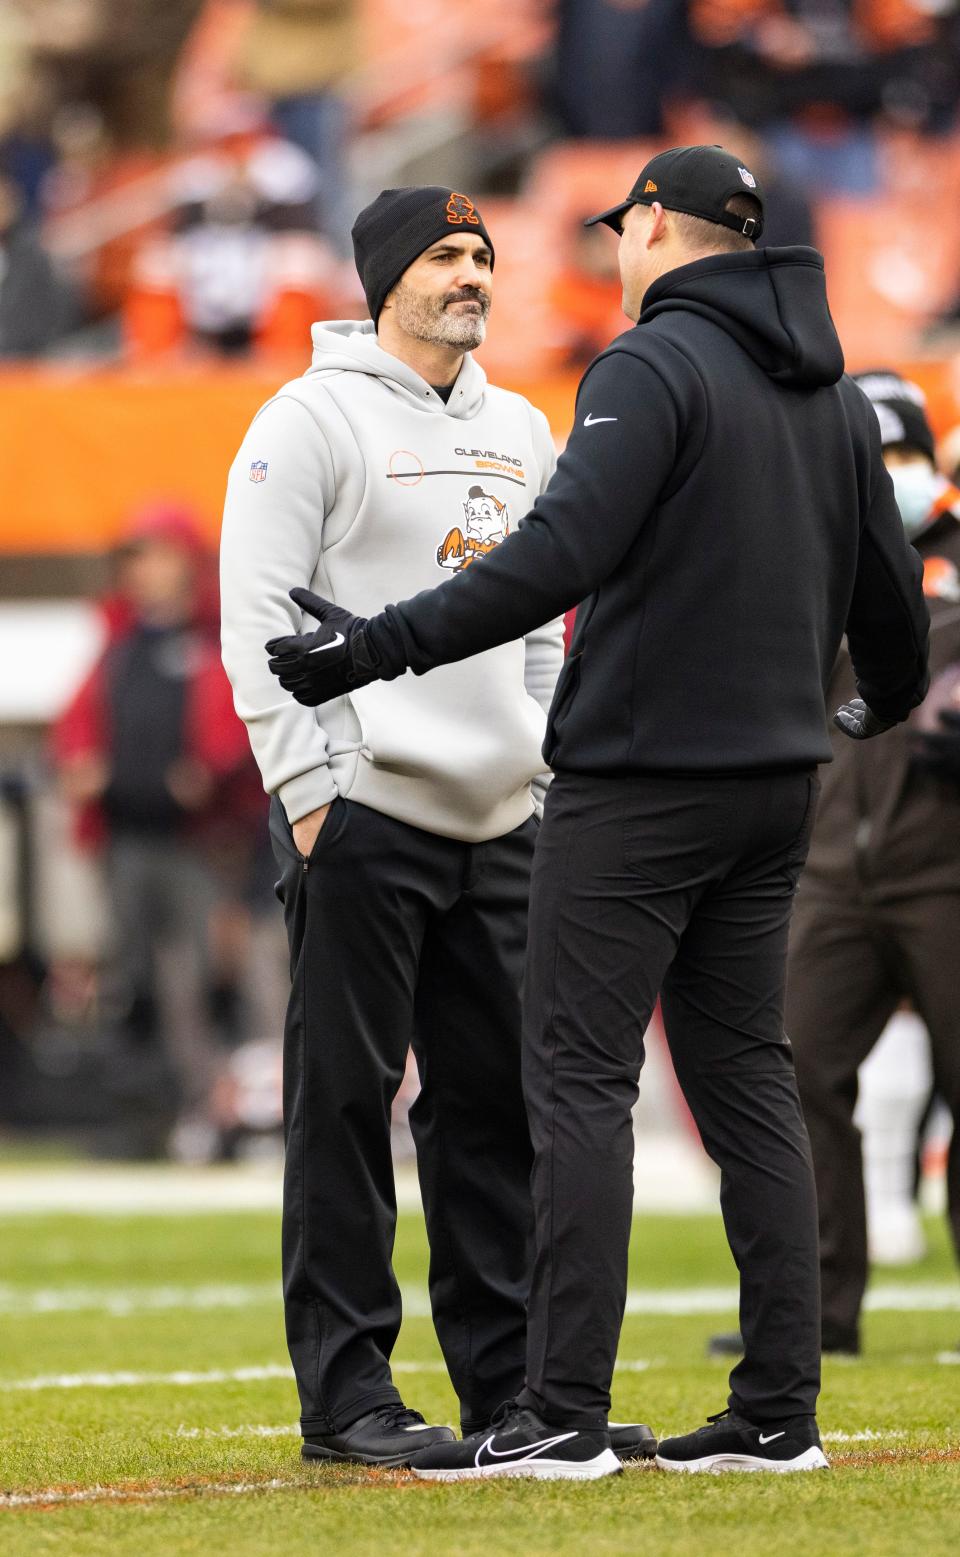 Jan 9, 2022; Cleveland, Ohio, USA; Cleveland Browns head coach Kevin Stefanski talks with Cincinnati Bengals head coach Zac Taylor during warmups before the game at FirstEnergy Stadium.